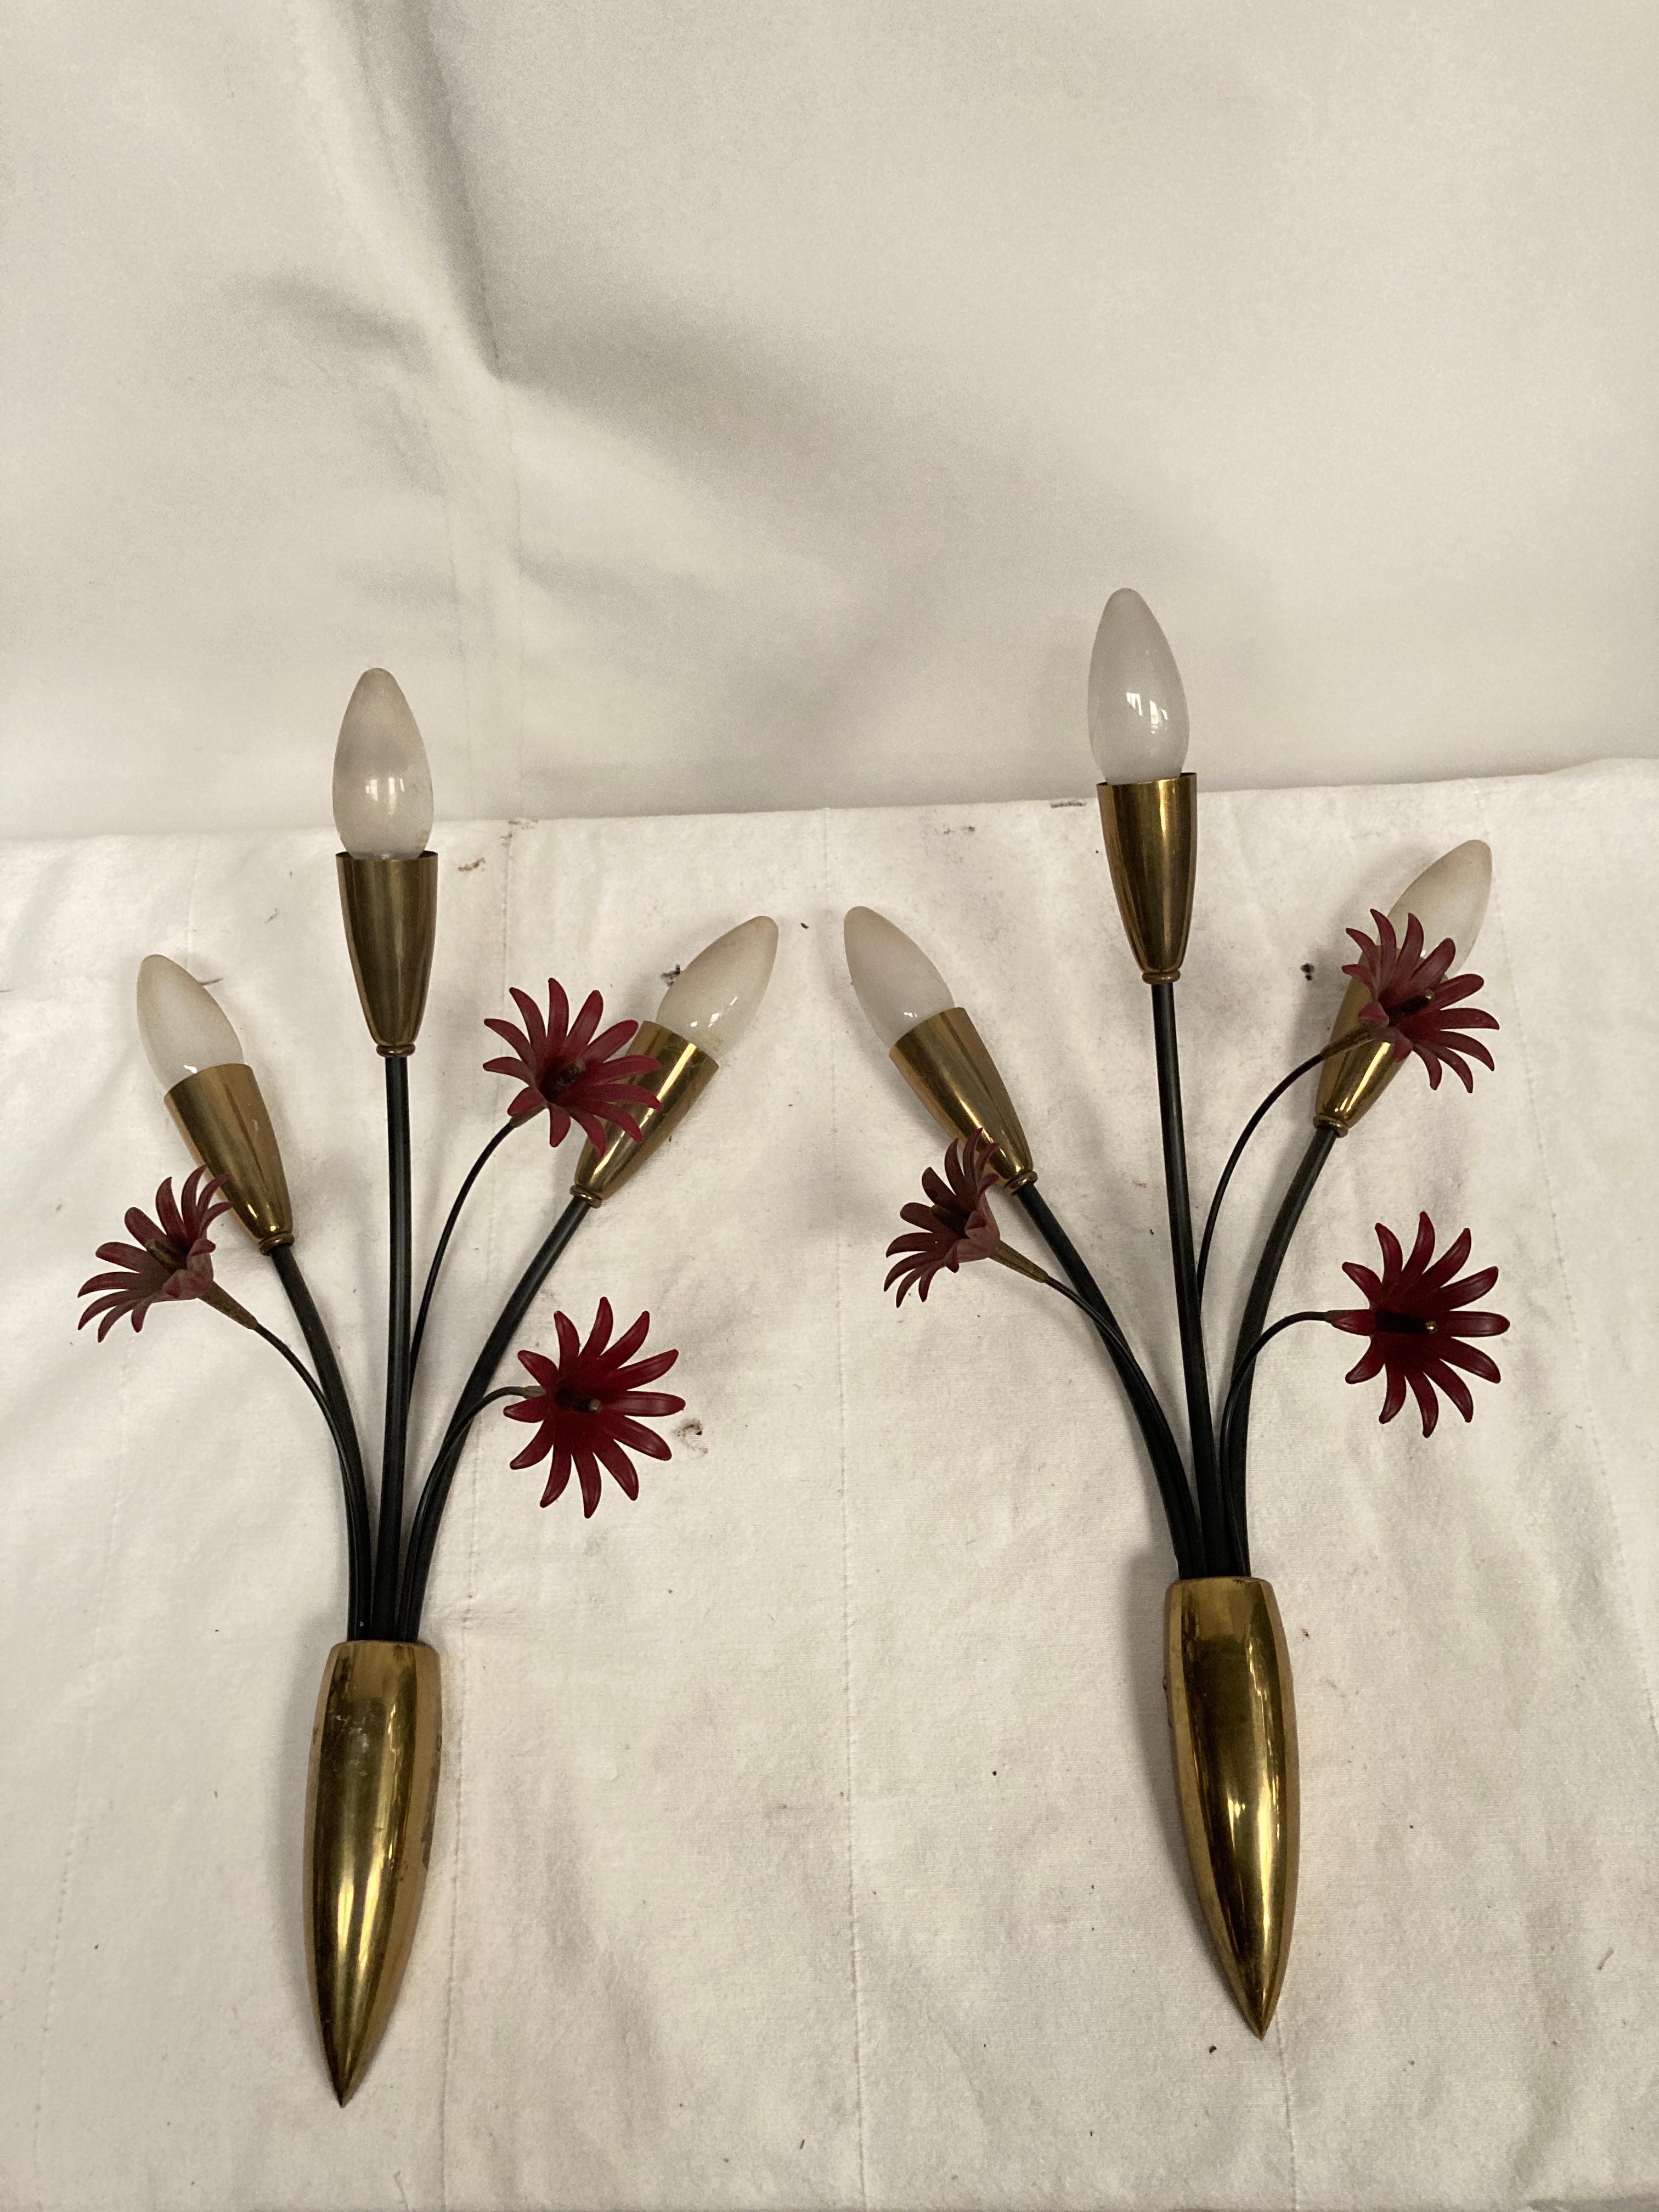 Very nice and unusual pair of 1950's sconces showing a bouquet of flowers
France